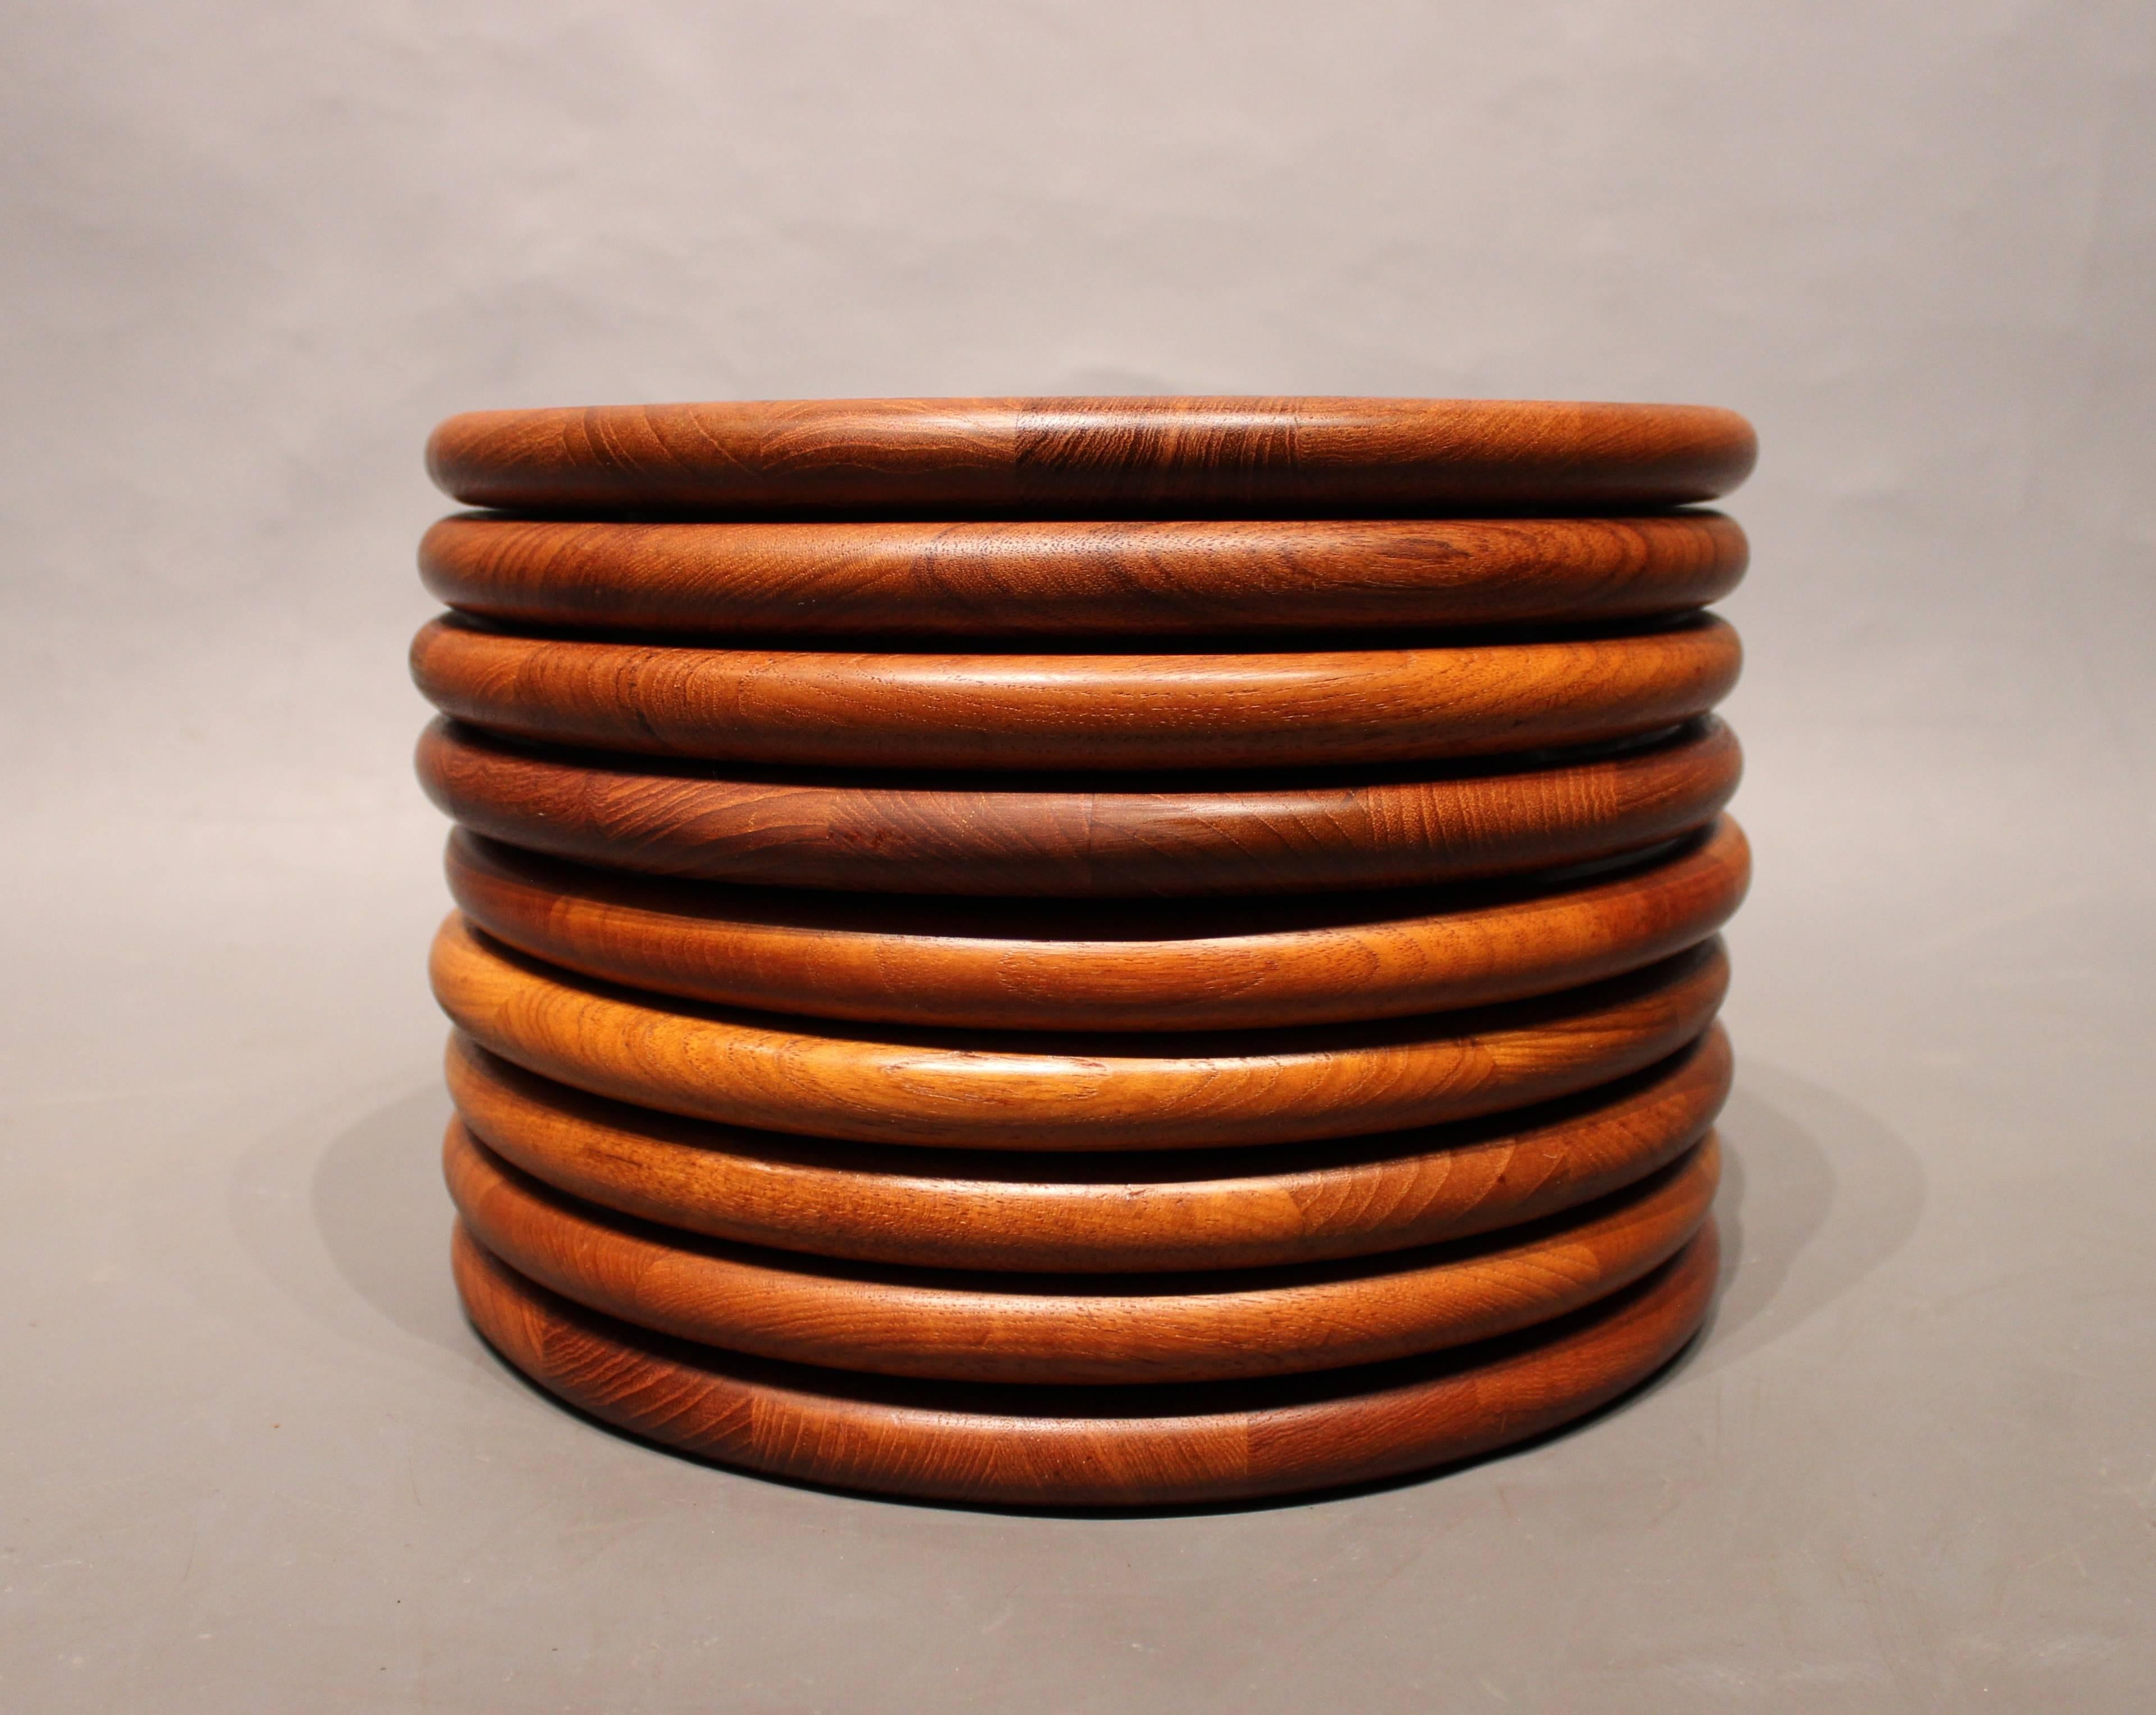 Steak plates in massive teak by Jens Harald Quistgaard and of Danish design from the 1960s.